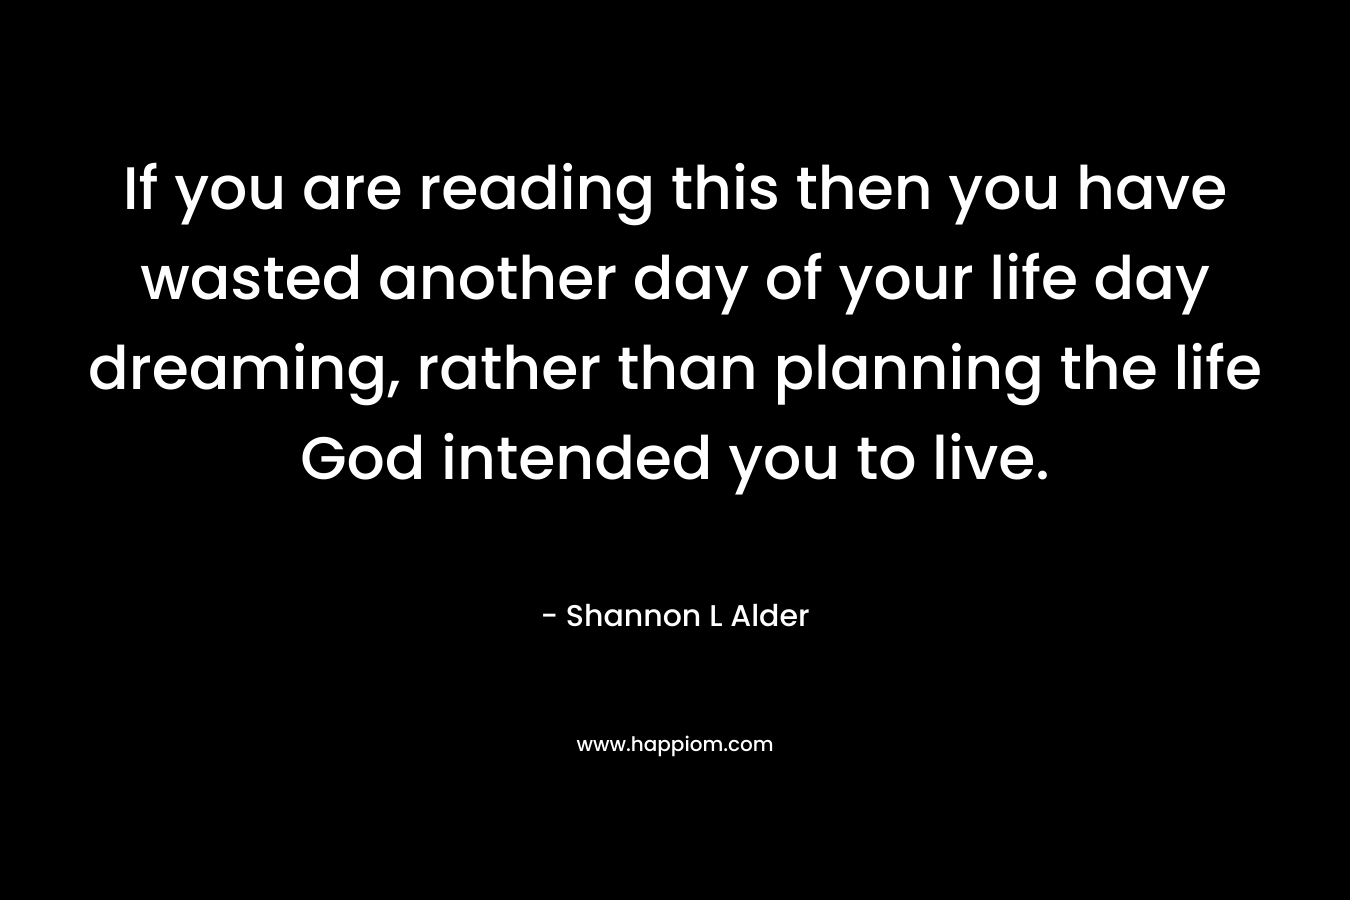 If you are reading this then you have wasted another day of your life day dreaming, rather than planning the life God intended you to live.